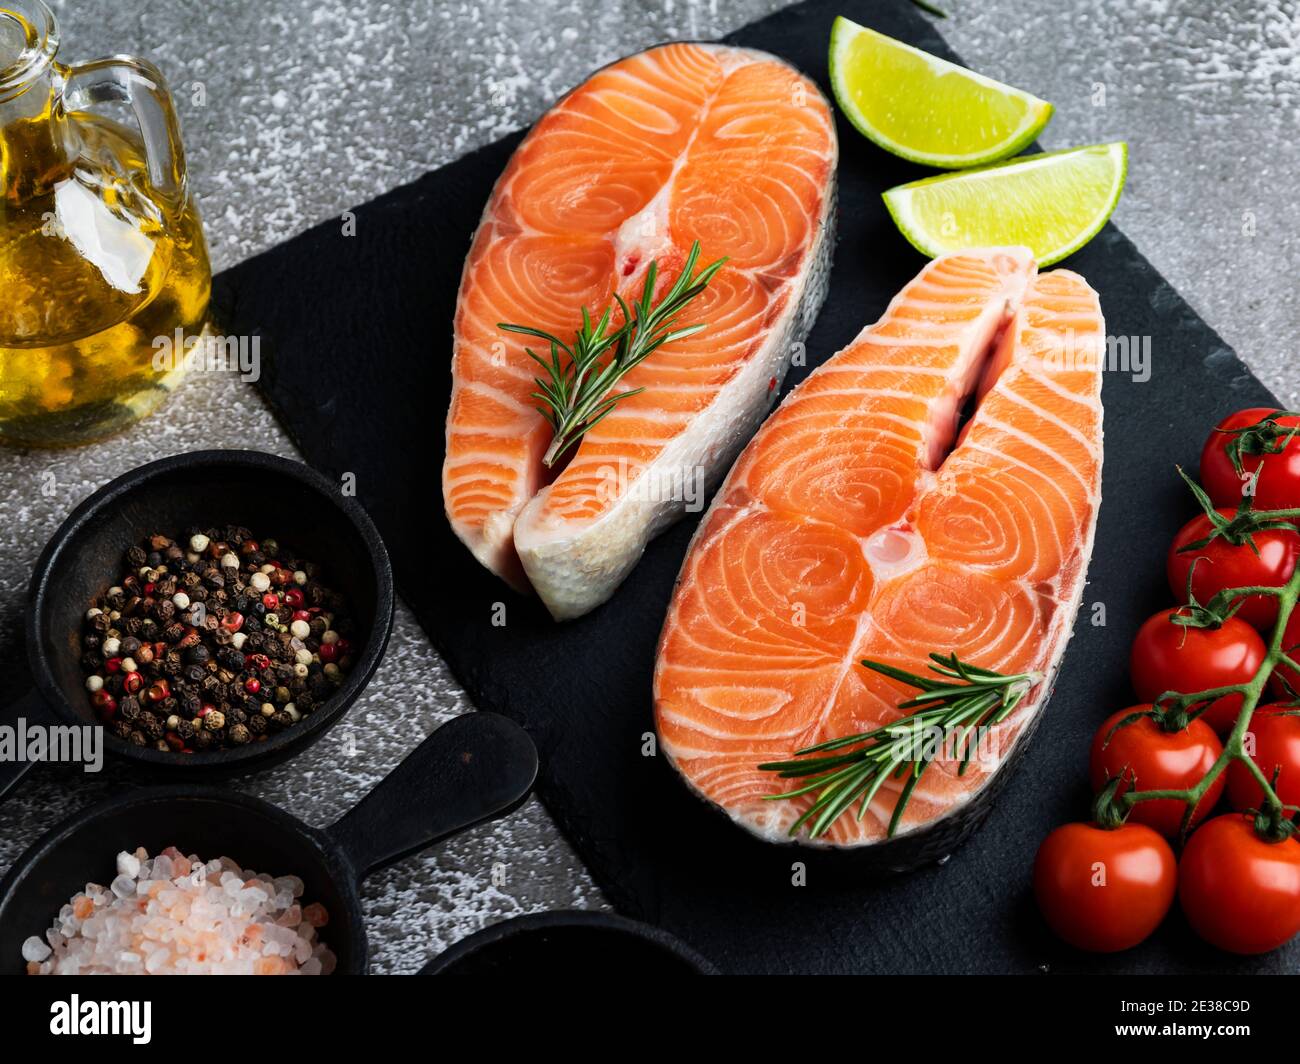 two raw steak fish trout, salmon and spices on black stone surface, dark Stock Photo